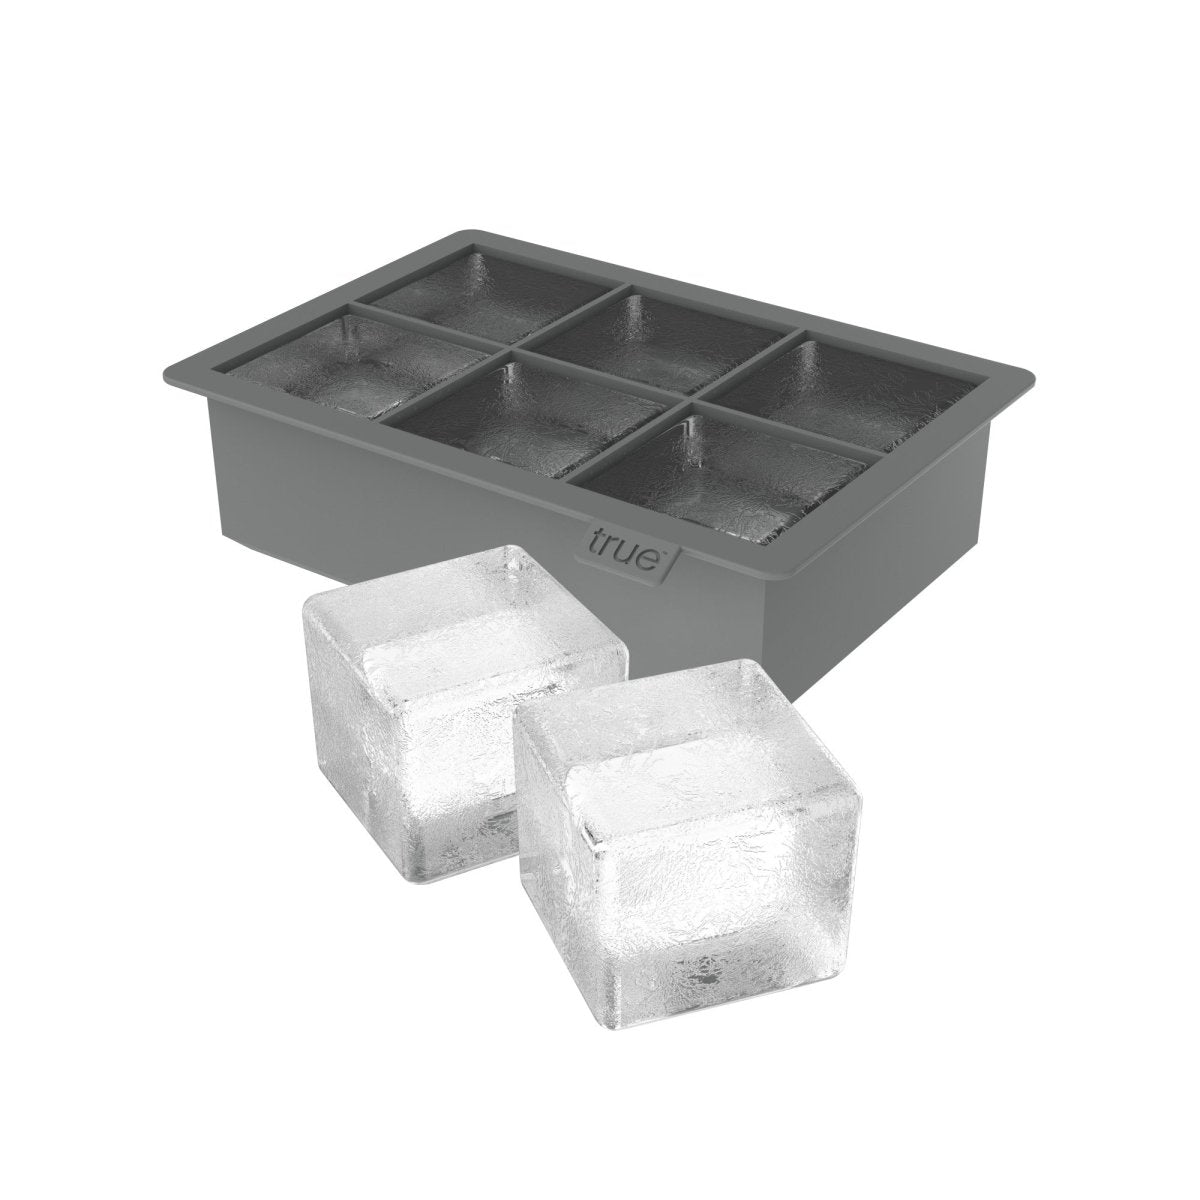 https://cdn.shopify.com/s/files/1/0275/1876/3088/products/colossal-ice-cube-tray-741161_1445x.jpg?v=1666386713